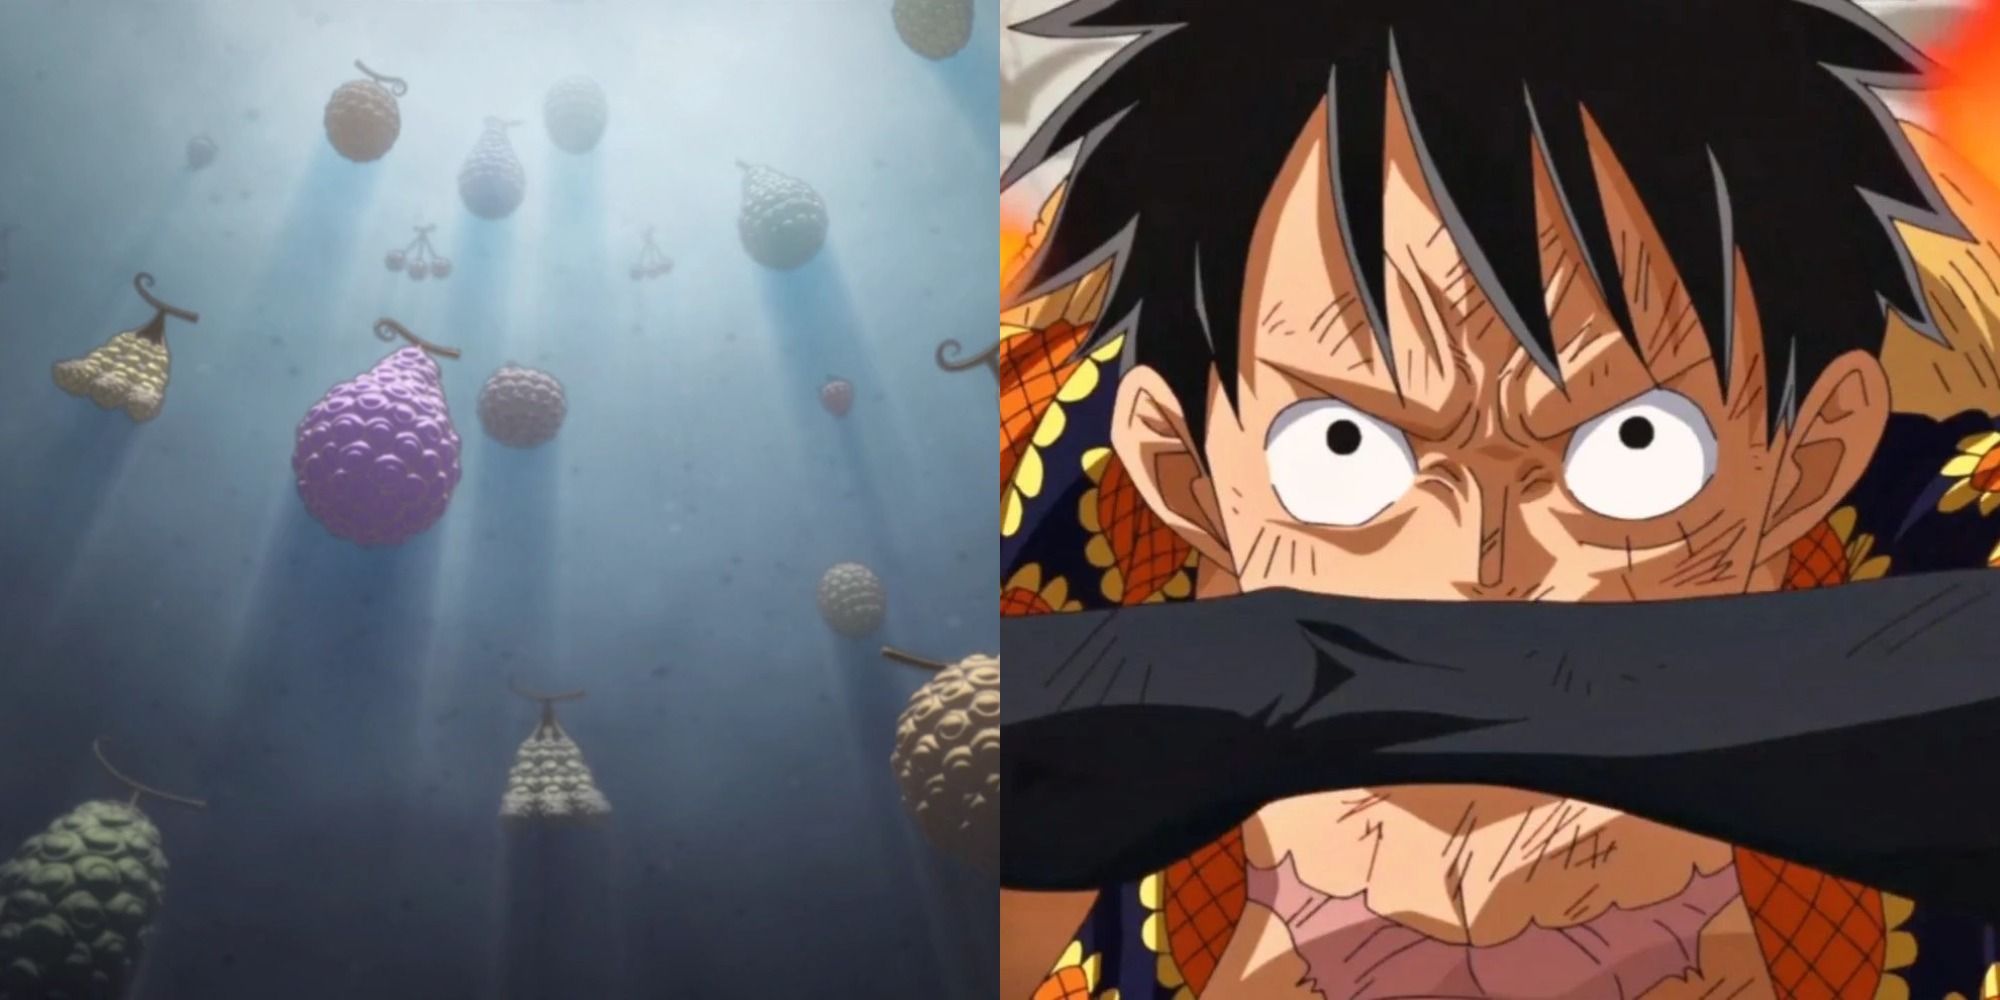 Which devil fruit are you destined to have in reali life? #onepiece #d